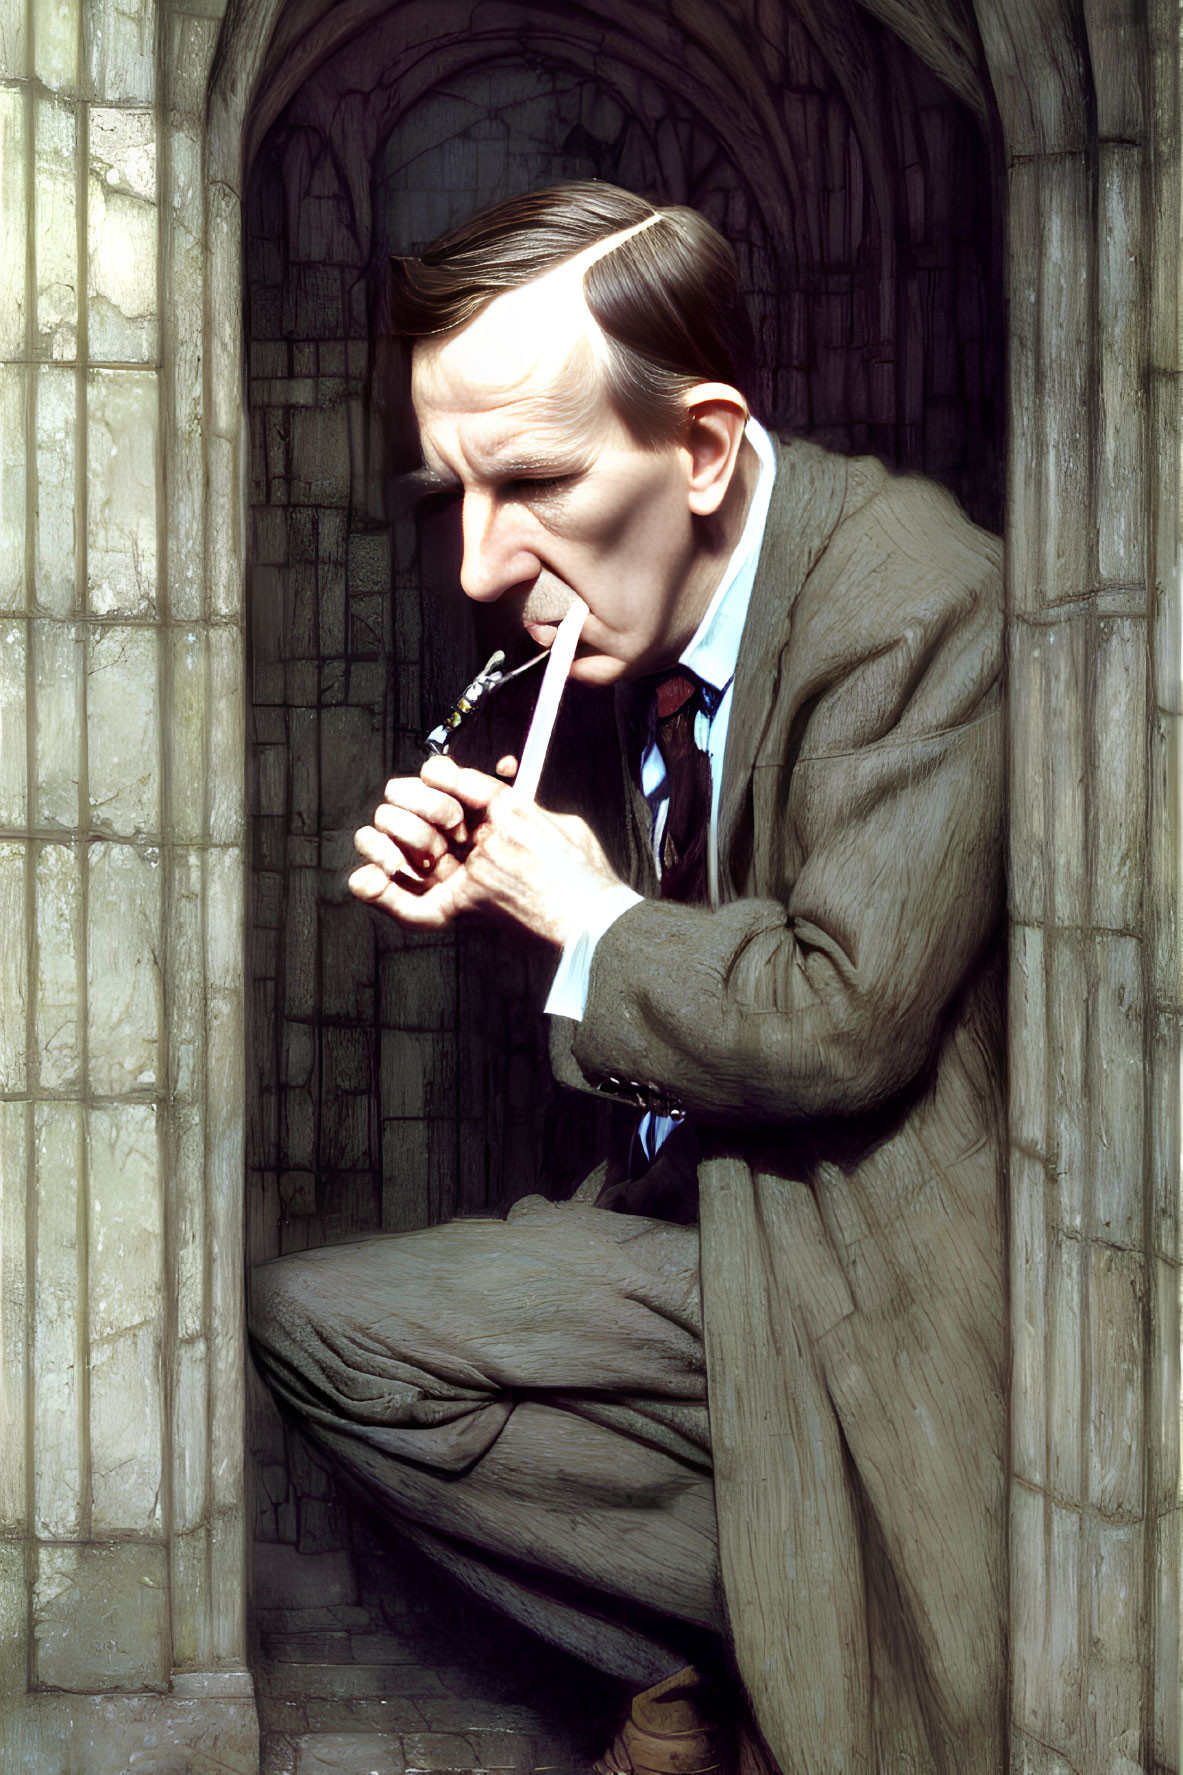 Man in tweed suit plays flute by gothic window in soft light